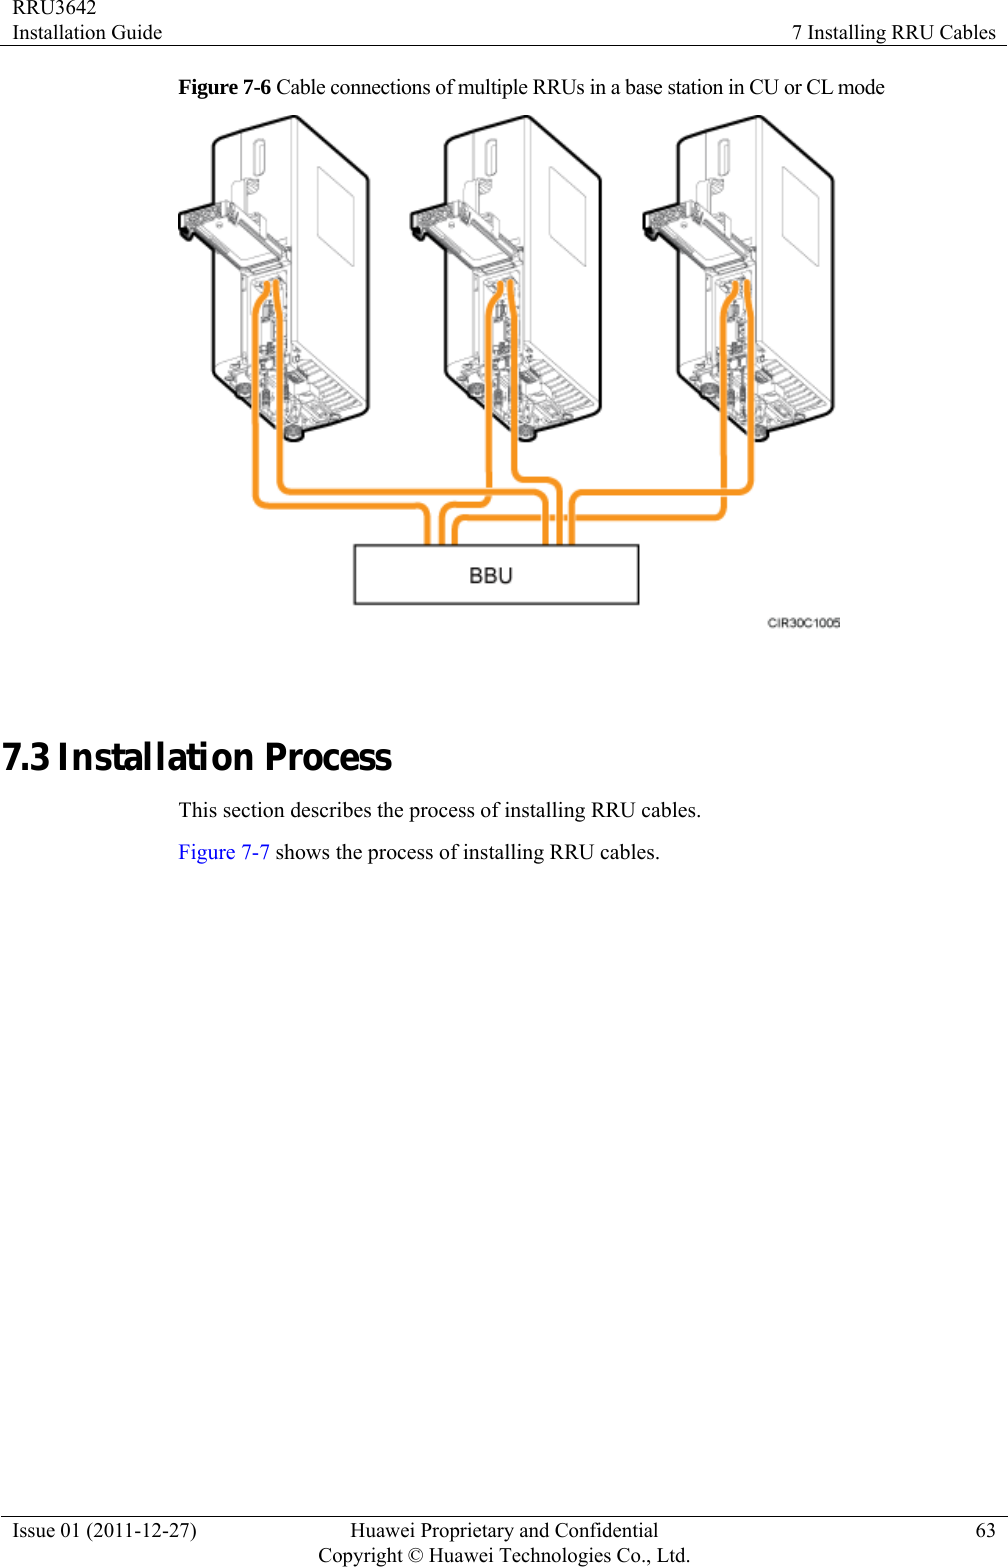 RRU3642 Installation Guide  7 Installing RRU Cables Issue 01 (2011-12-27)  Huawei Proprietary and Confidential         Copyright © Huawei Technologies Co., Ltd.63 Figure 7-6 Cable connections of multiple RRUs in a base station in CU or CL mode   7.3 Installation Process This section describes the process of installing RRU cables. Figure 7-7 shows the process of installing RRU cables. 